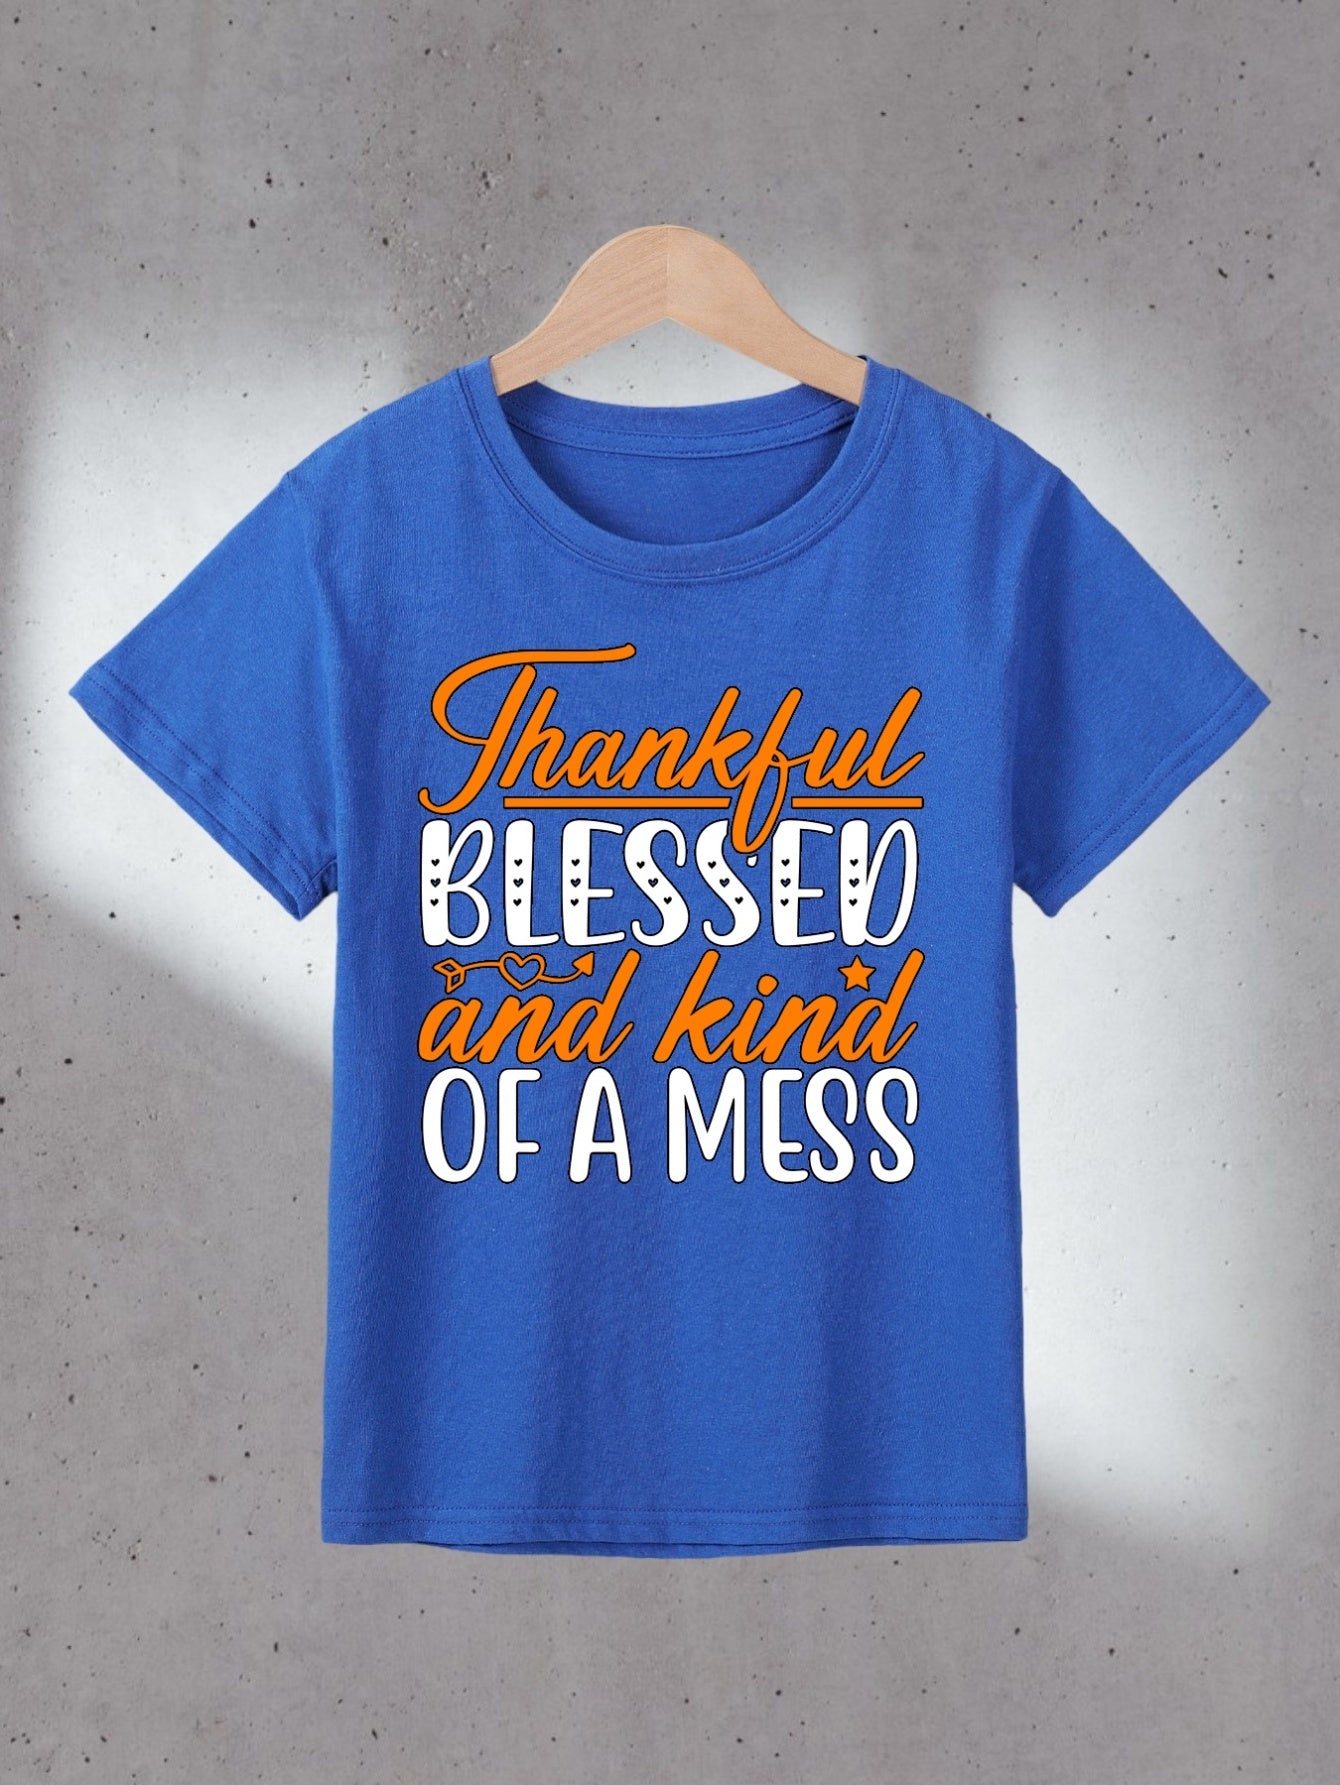 Thankful Blessed Kind Of A Mess (thanksgiving themed) Youth Christian T-shirt claimedbygoddesigns